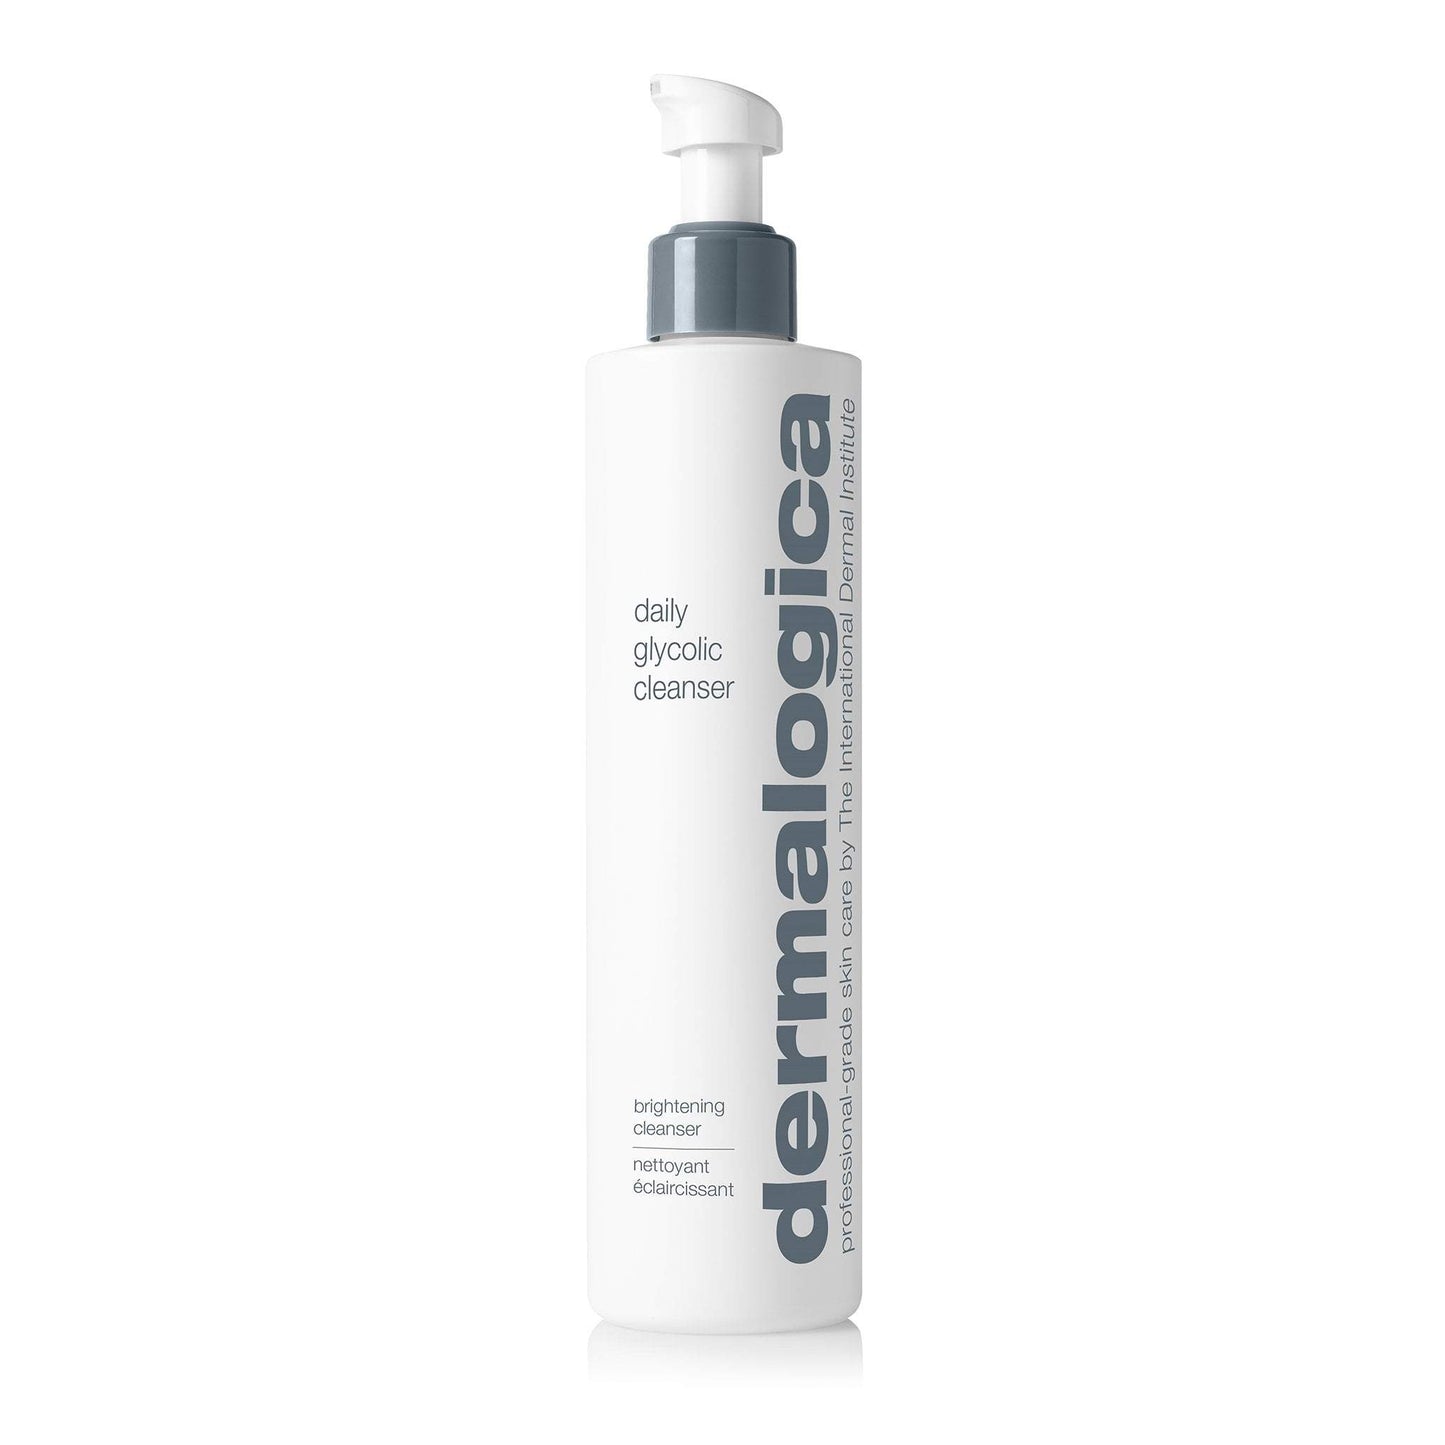 daily glycolic cleanser 10 oz